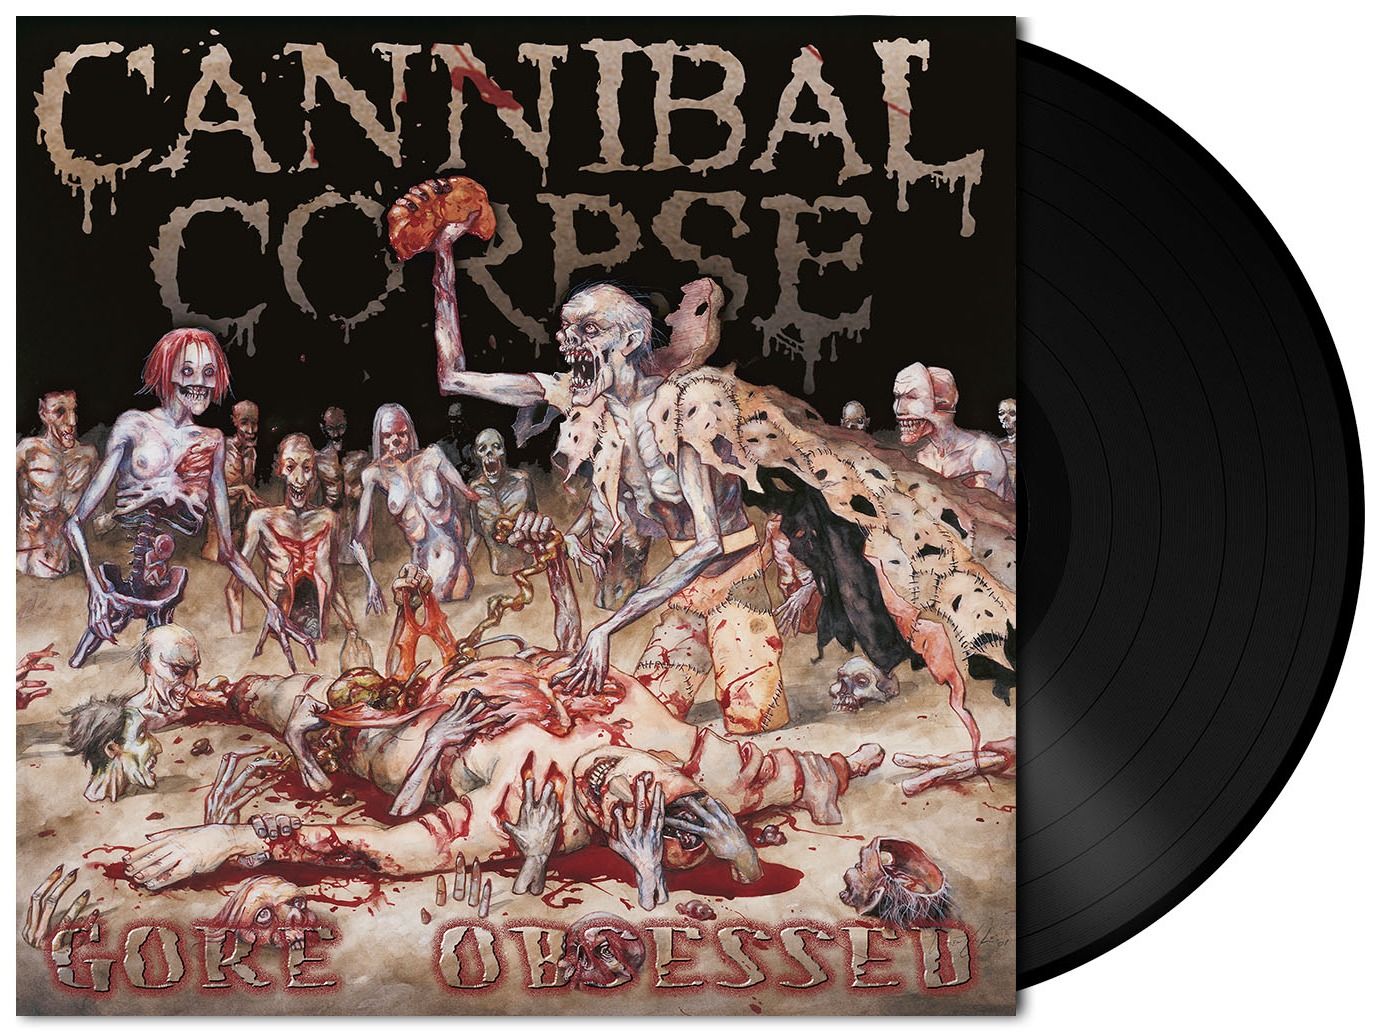 Cannibal Corpse "Gore Obsessed" Black Vinyl